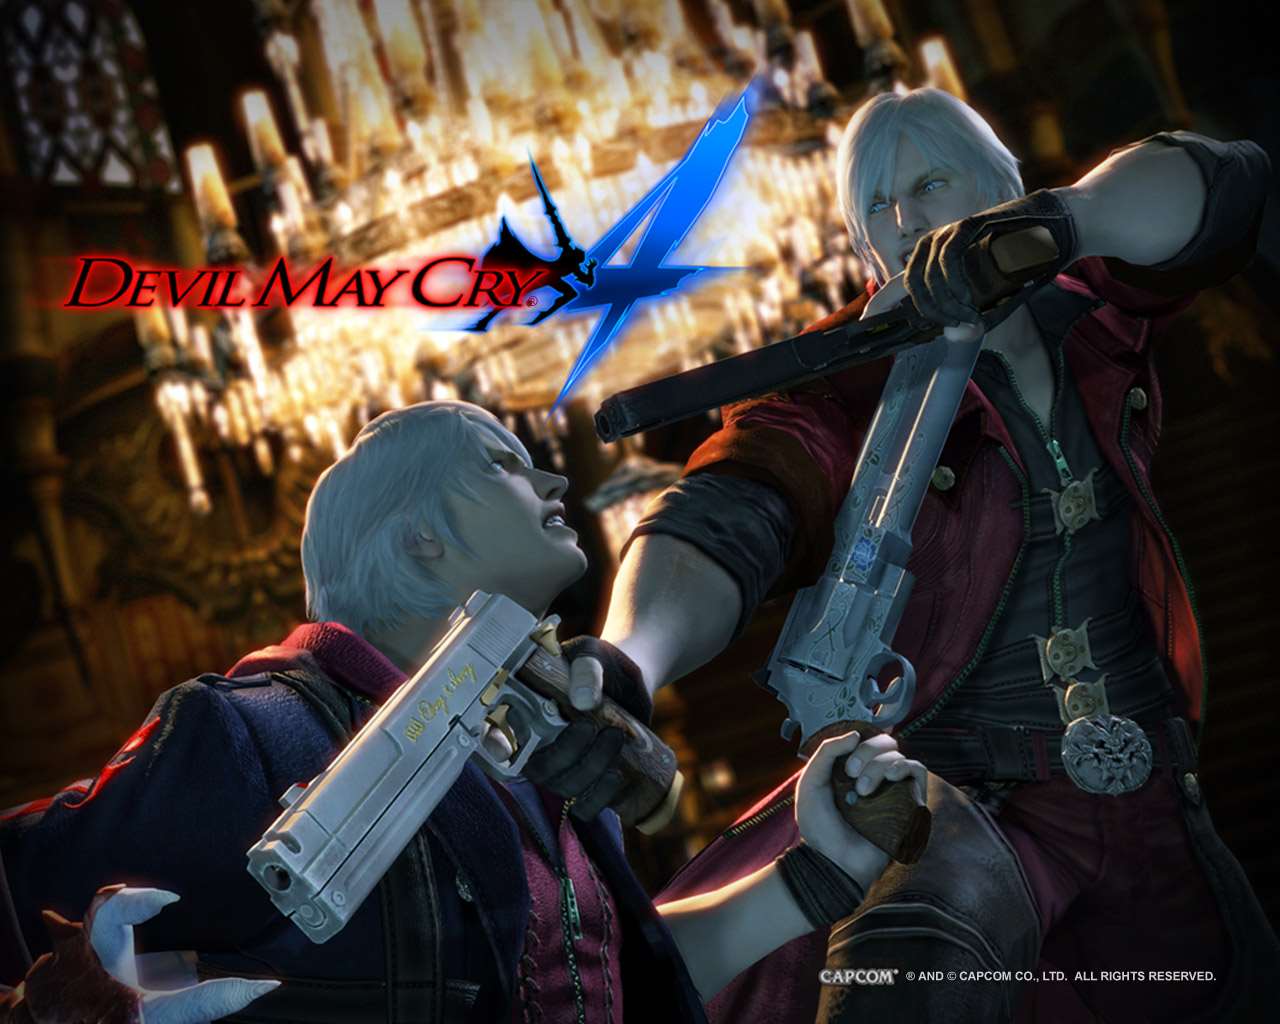 Official Devil May Cry 4 Wallpaper 6 (1280 x 1024)